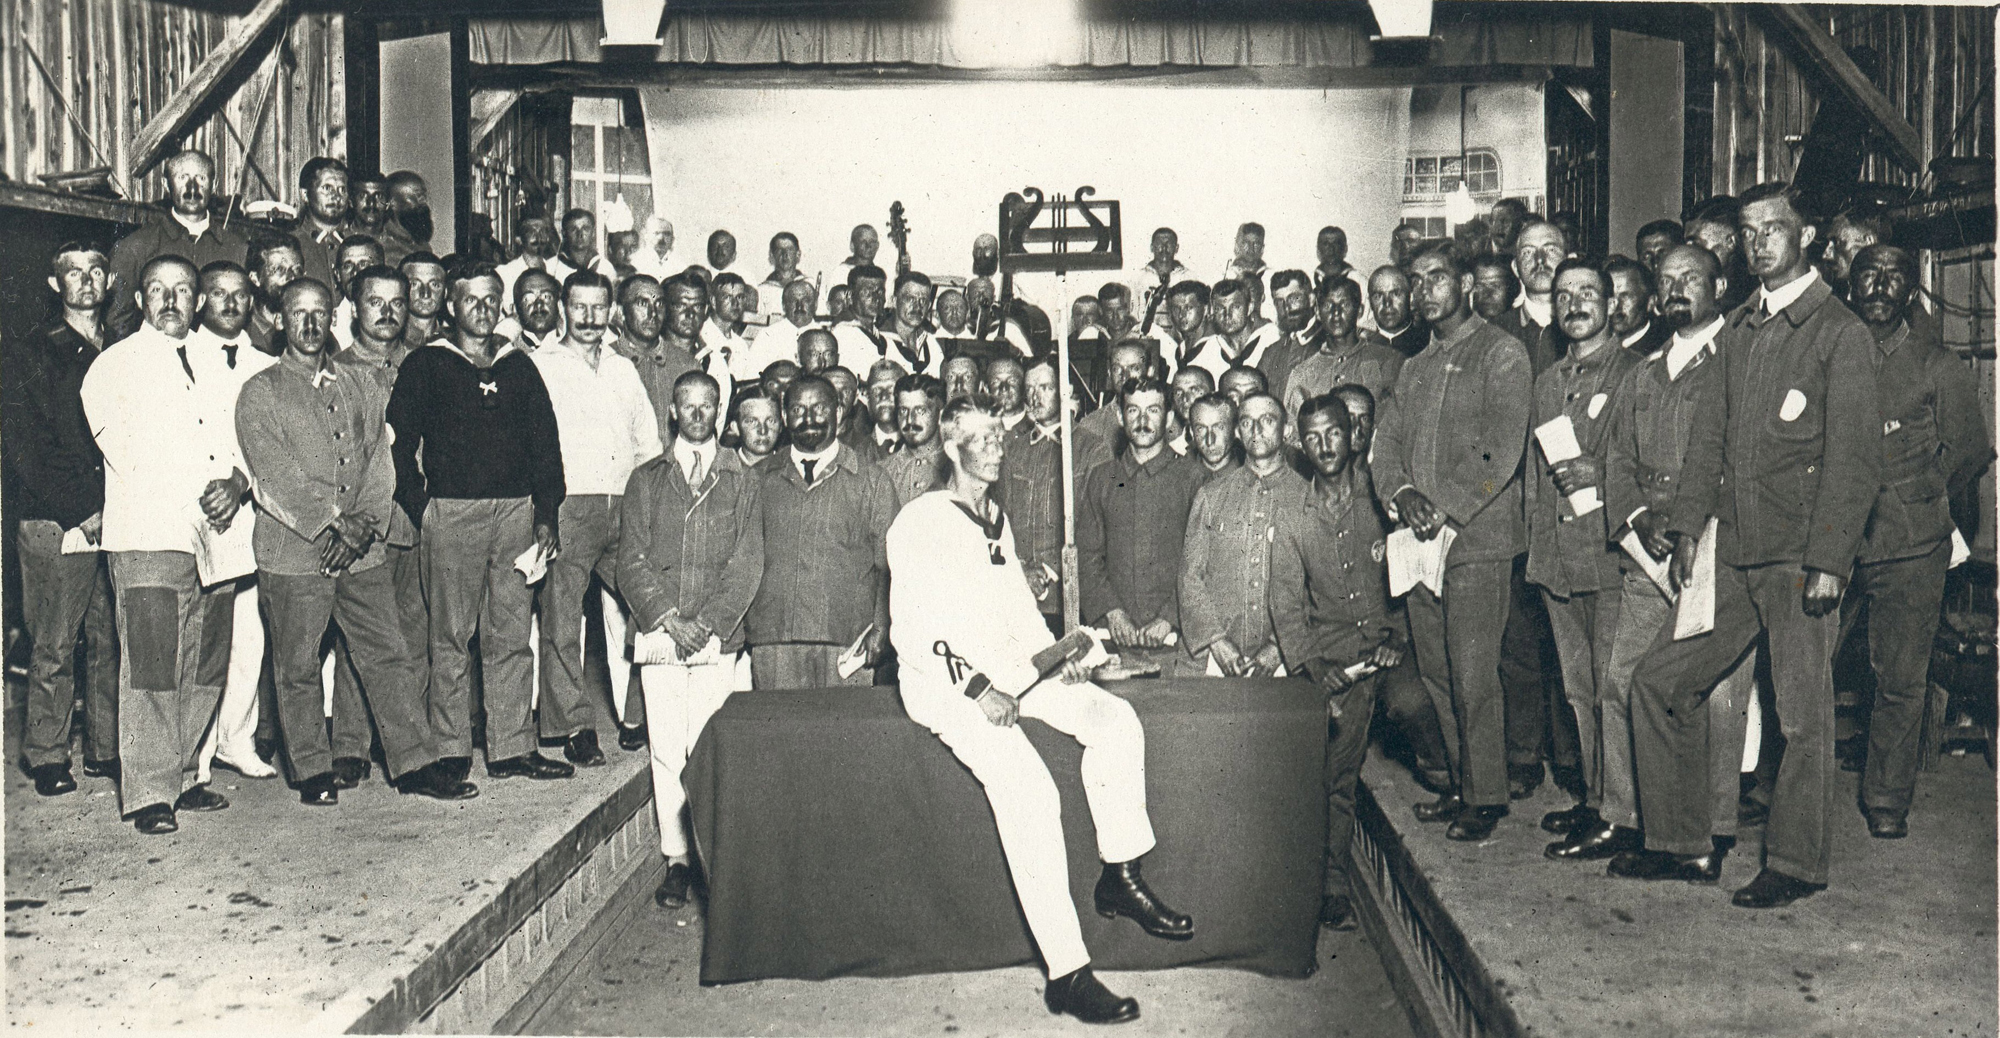 Profound performance: Prisoner of war Hermann Hansen (seated, center) conducted the Tokushima Orchestra and a choir made up of other POWs in a performance of Beethoven's Ninth Symphony that was held June 1, 1918, in Tokushima Prefecture. | NARUTO GERMAN HOUSE